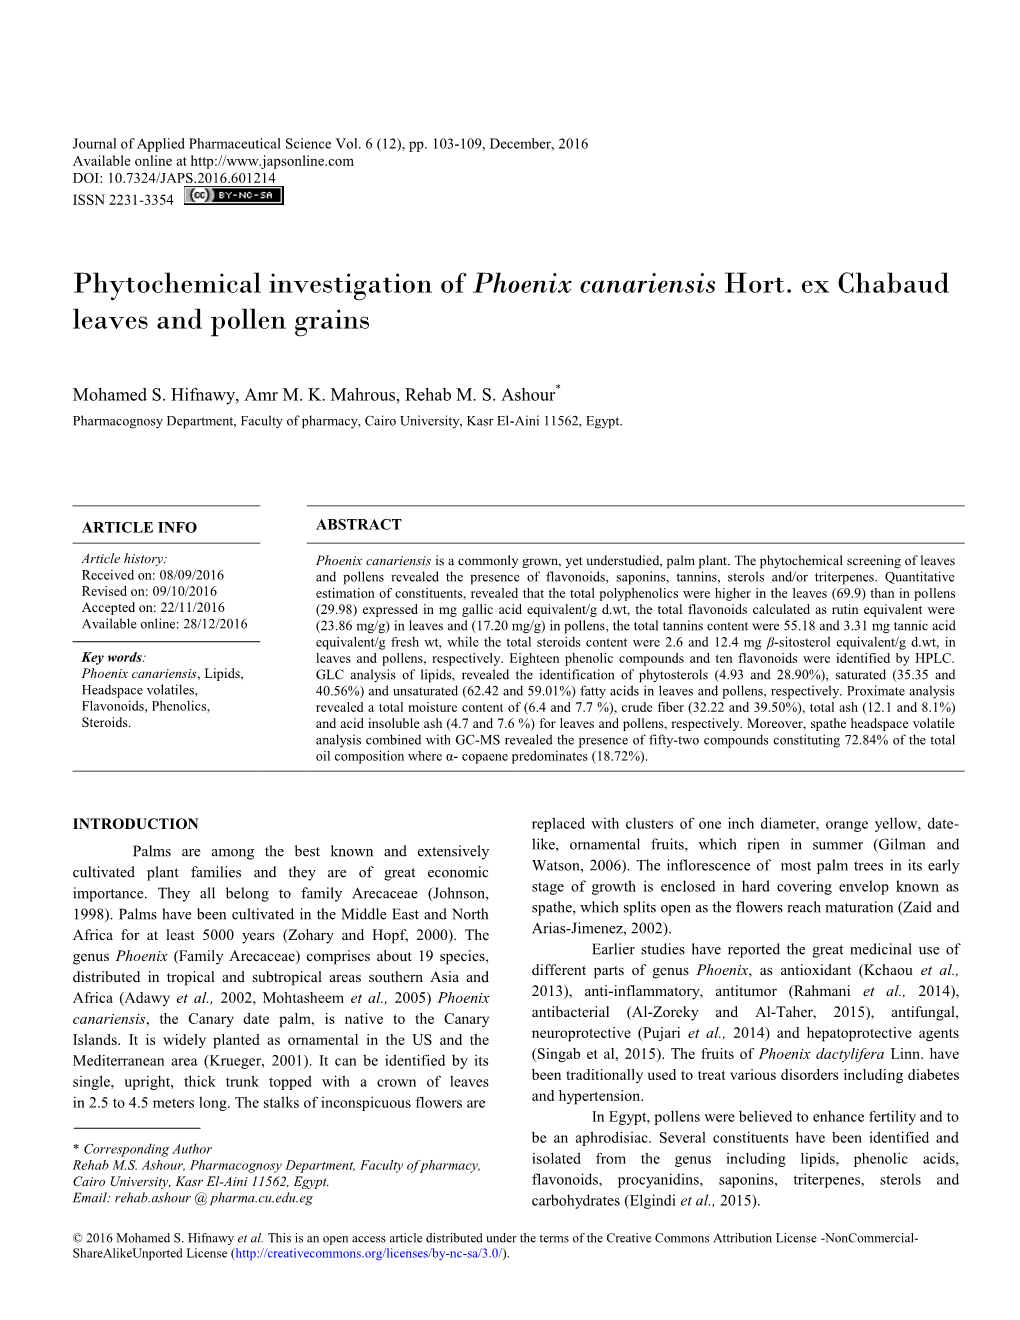 Phytochemical Investigation of Phoenix Canariensis Hort. Ex Chabaud Leaves and Pollen Grains